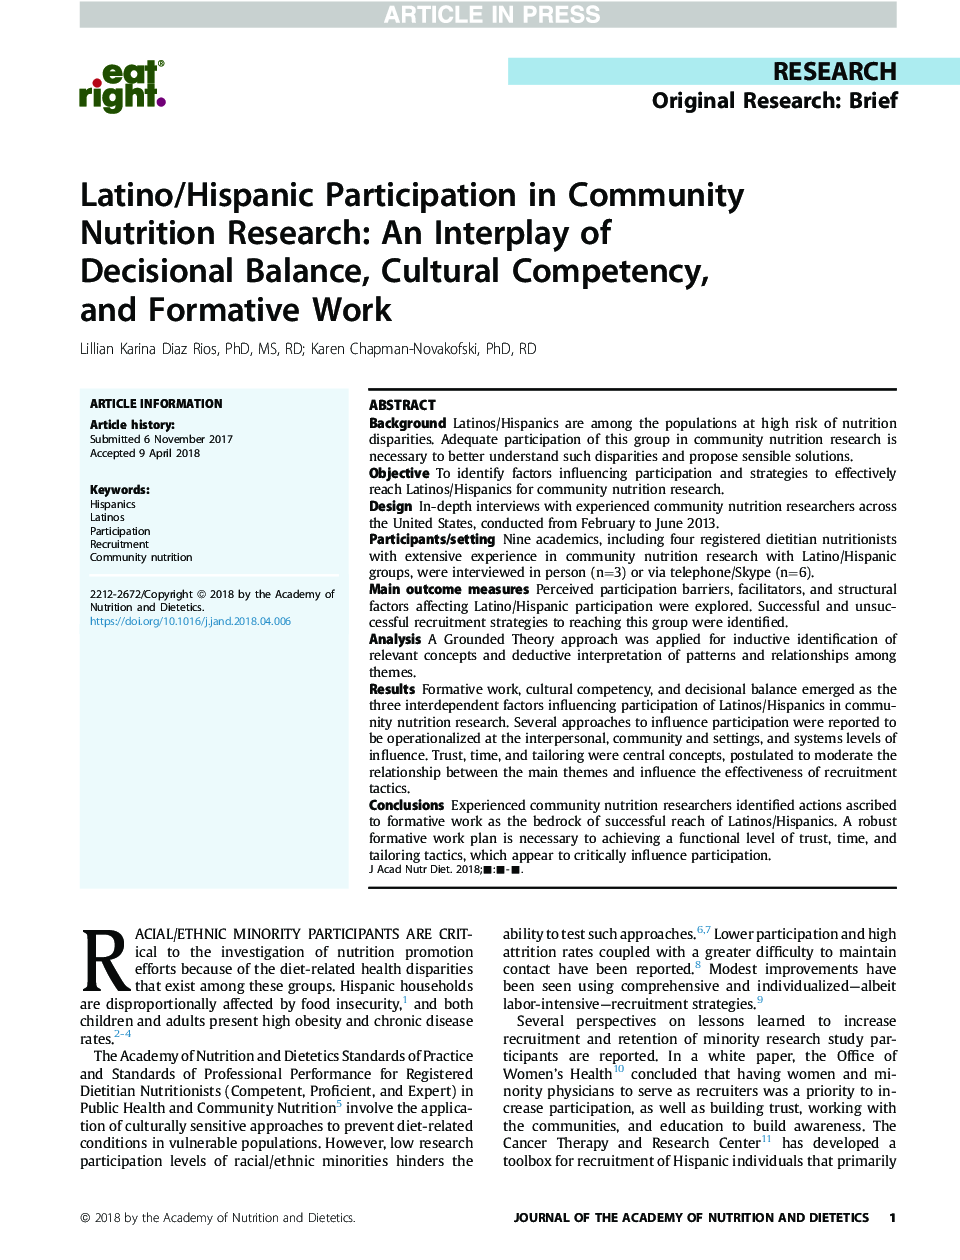 Latino/Hispanic Participation in Community Nutrition Research: An Interplay of DecisionalÂ Balance, Cultural Competency, andÂ Formative Work